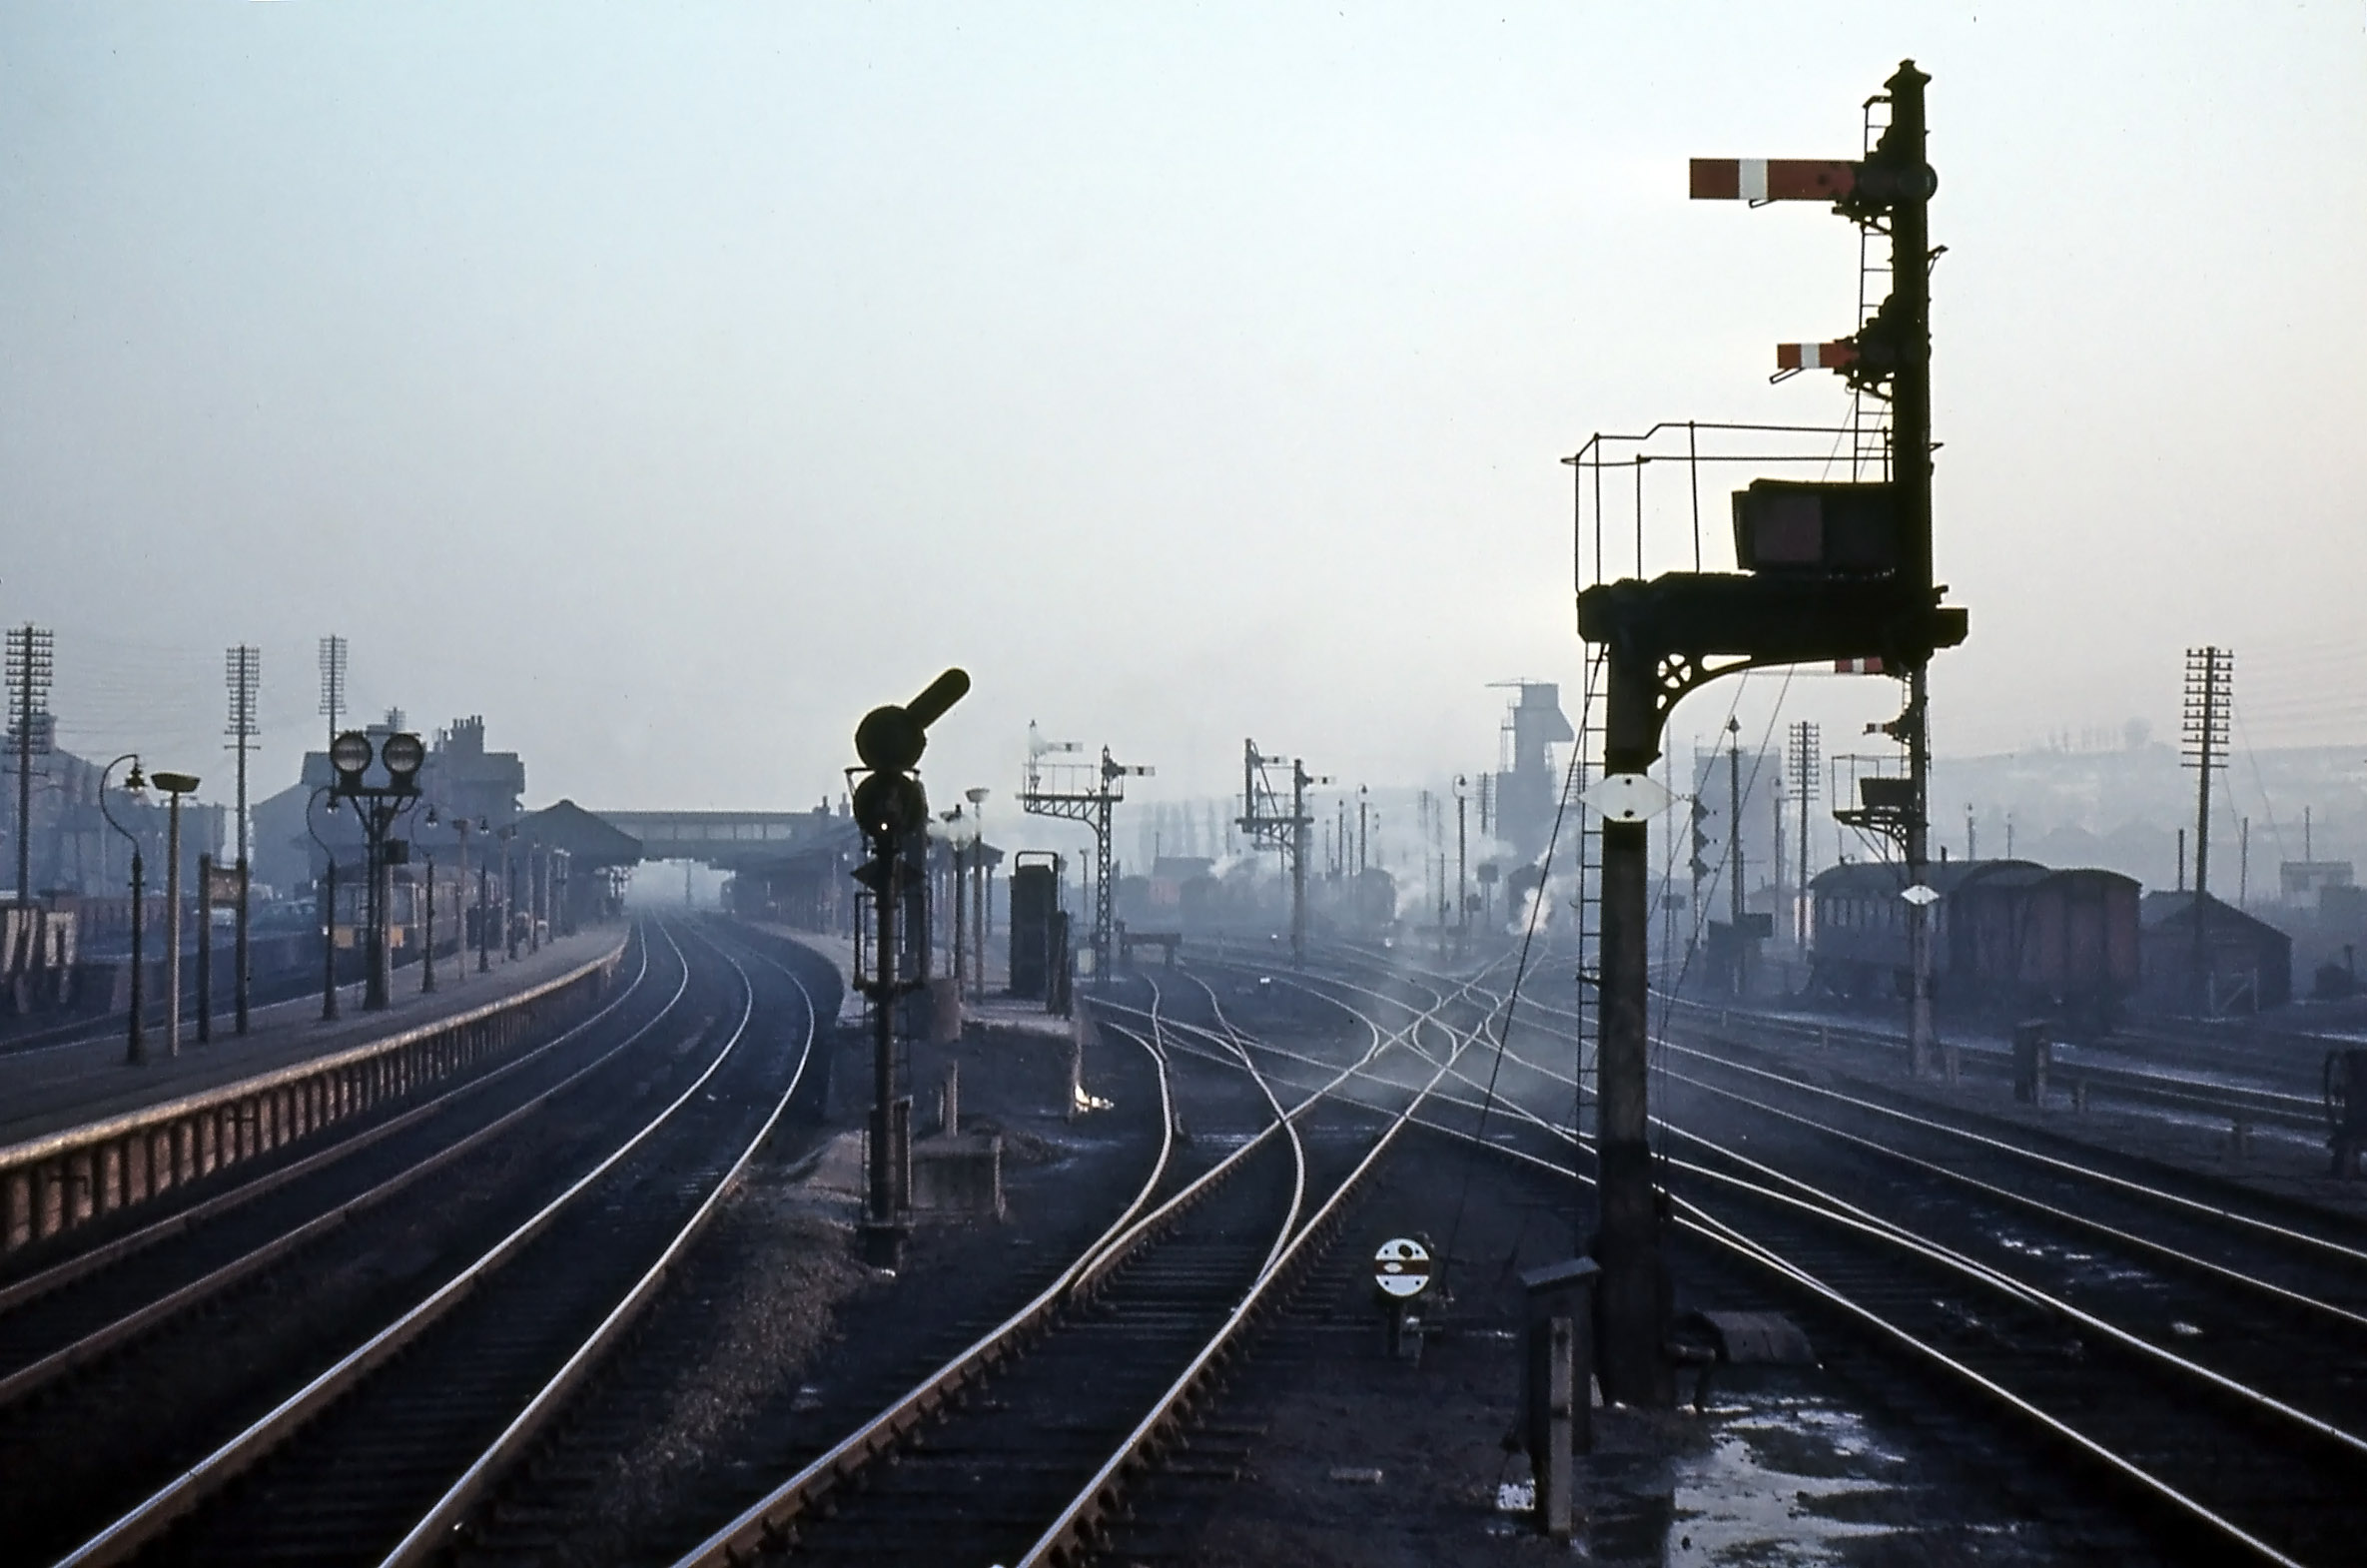 This photograph was taken in 1962 from about halfway up the signalbox steps. Compared with the previous view: o The tall Main line signals have been replaced with a colour light signal which showed an inclined row of white lights if the Nottingham line was to be taken. o The Bay platform and Western platform departure signals are unchanged. o The old-style signal controlling access from the Nottingham direction has been replaced by the bracketed post in the right foreground. It has one full-sized and one miniature arm together with an electric route indicator in the box beneath them. The full-size arm gave access to one of three principal routes, provided that it was clear. The miniature arm permitted access to sidings or, under caution, to a principal route which was already occupied. When either arm was raised the route indicator showed a code to inform the driver of the route set: o DB – Down Bay o ES – Engine Spur (miniature arm only) o W – Western platform o C – Carriage sidings (miniature arm only) o UG – Up Goods line o S – Shunt line (miniature arm only) Further back and across to the right is a similar signal post controlling access to the Goods line in the southbound (or Up) direction. Again it has both a full size and a miniature arm, and a route indicator capable of showing routes as follows: o C – Carriage sidings (miniature arm only) o UG – Up Goods line o S – Shunt line (miniature arm only) Beyond is a signal post with three miniature arms mounted vertically. This was the shed outlet signal which is seen more clearly in the next photograph. Photograph by Noel Ingram, used with permission from Steam World.